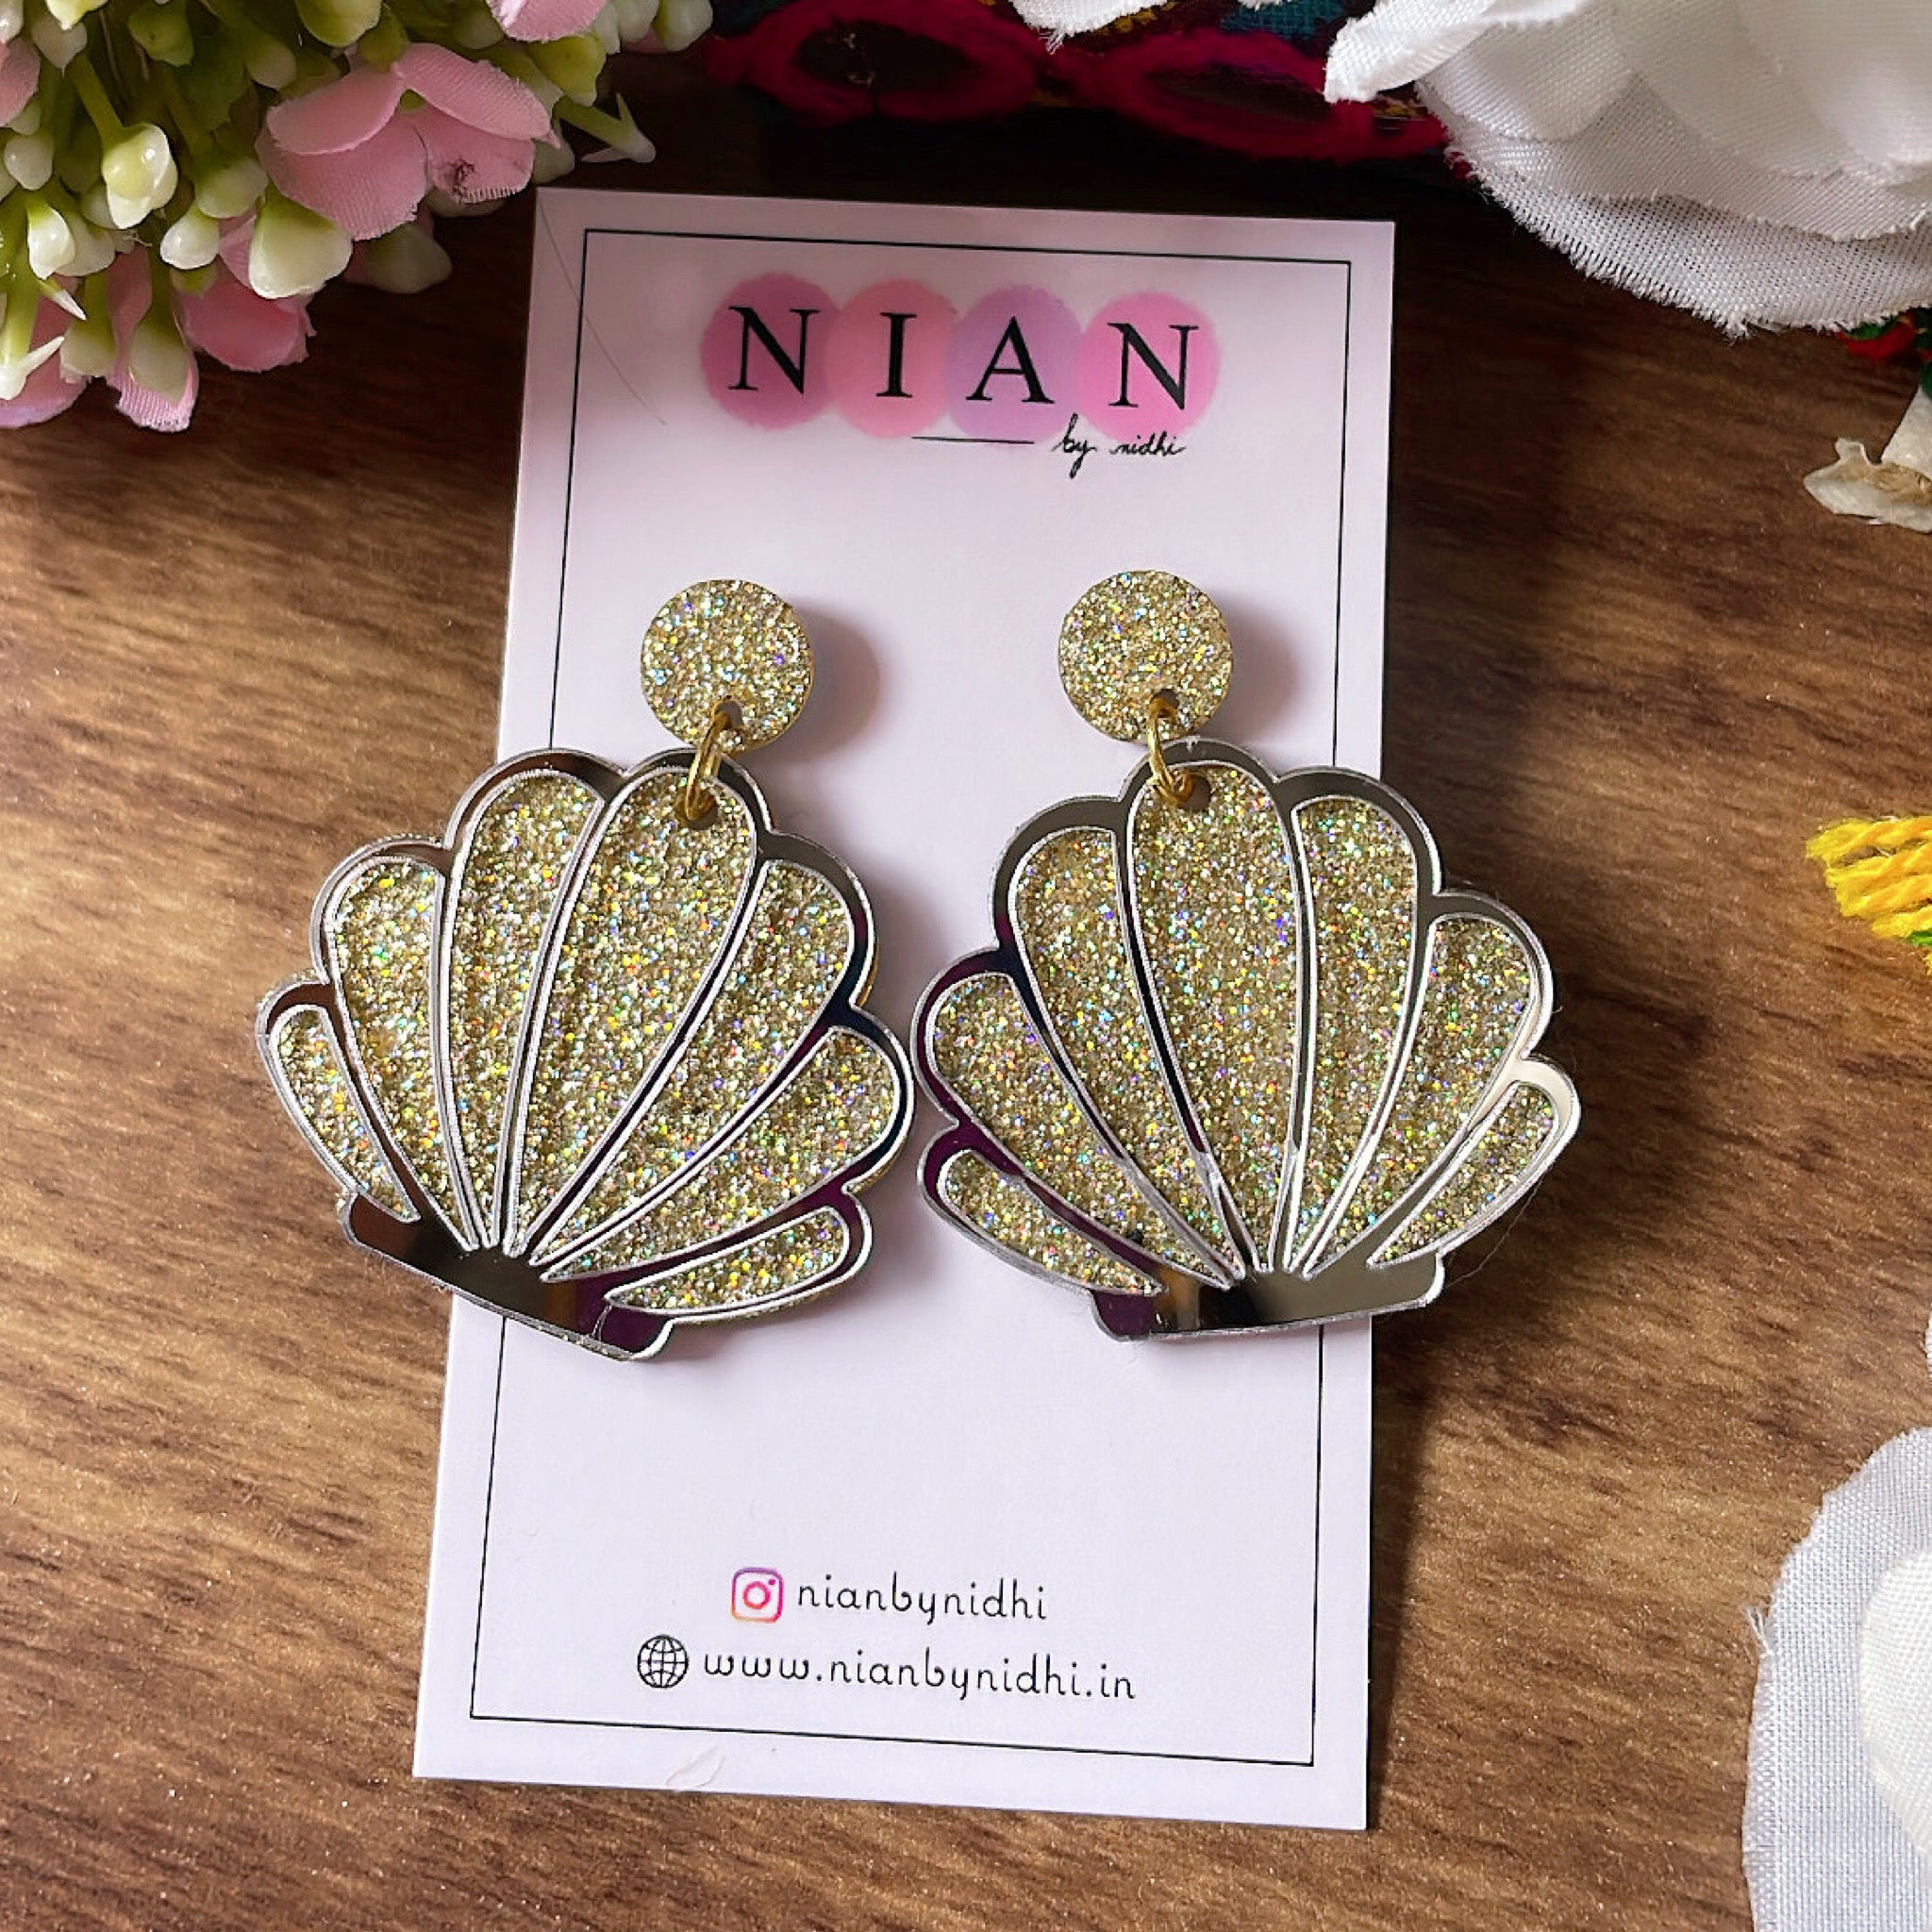 Shiny Shell Earrings - Nian by Nidhi - Shimmer Golden and Glassy Silver - placed in a brown and colorful background